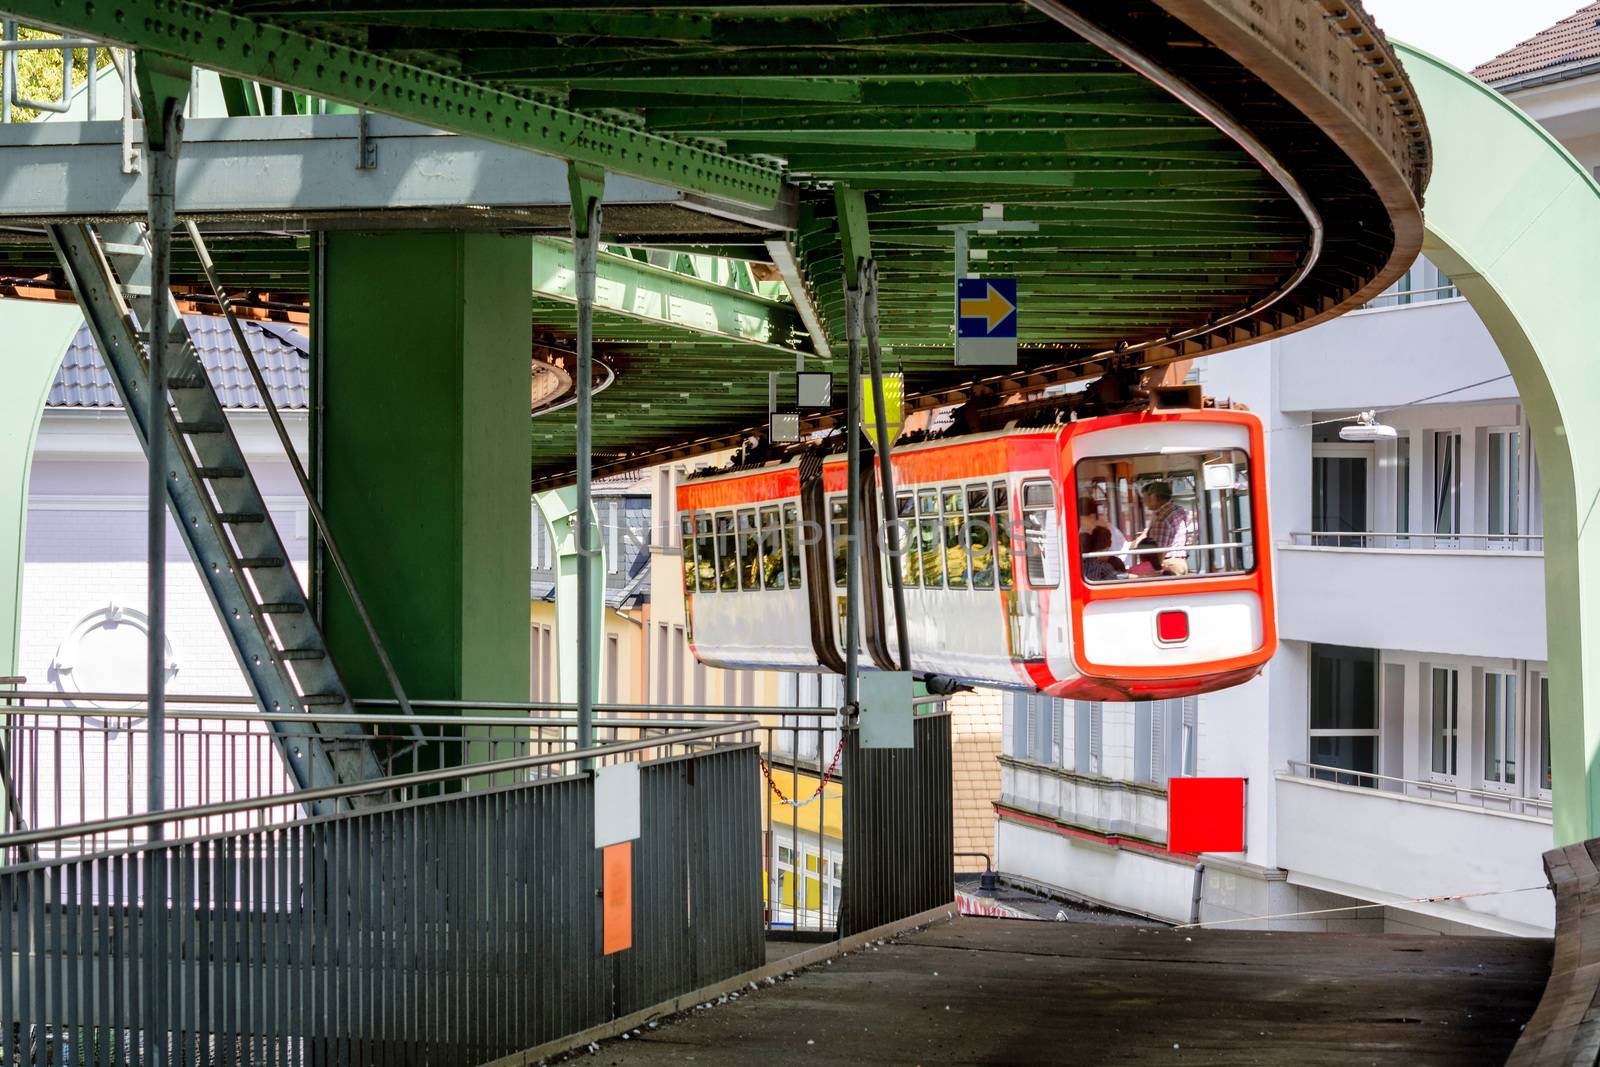 Suspension railway at the entrance to the station.           by JFsPic